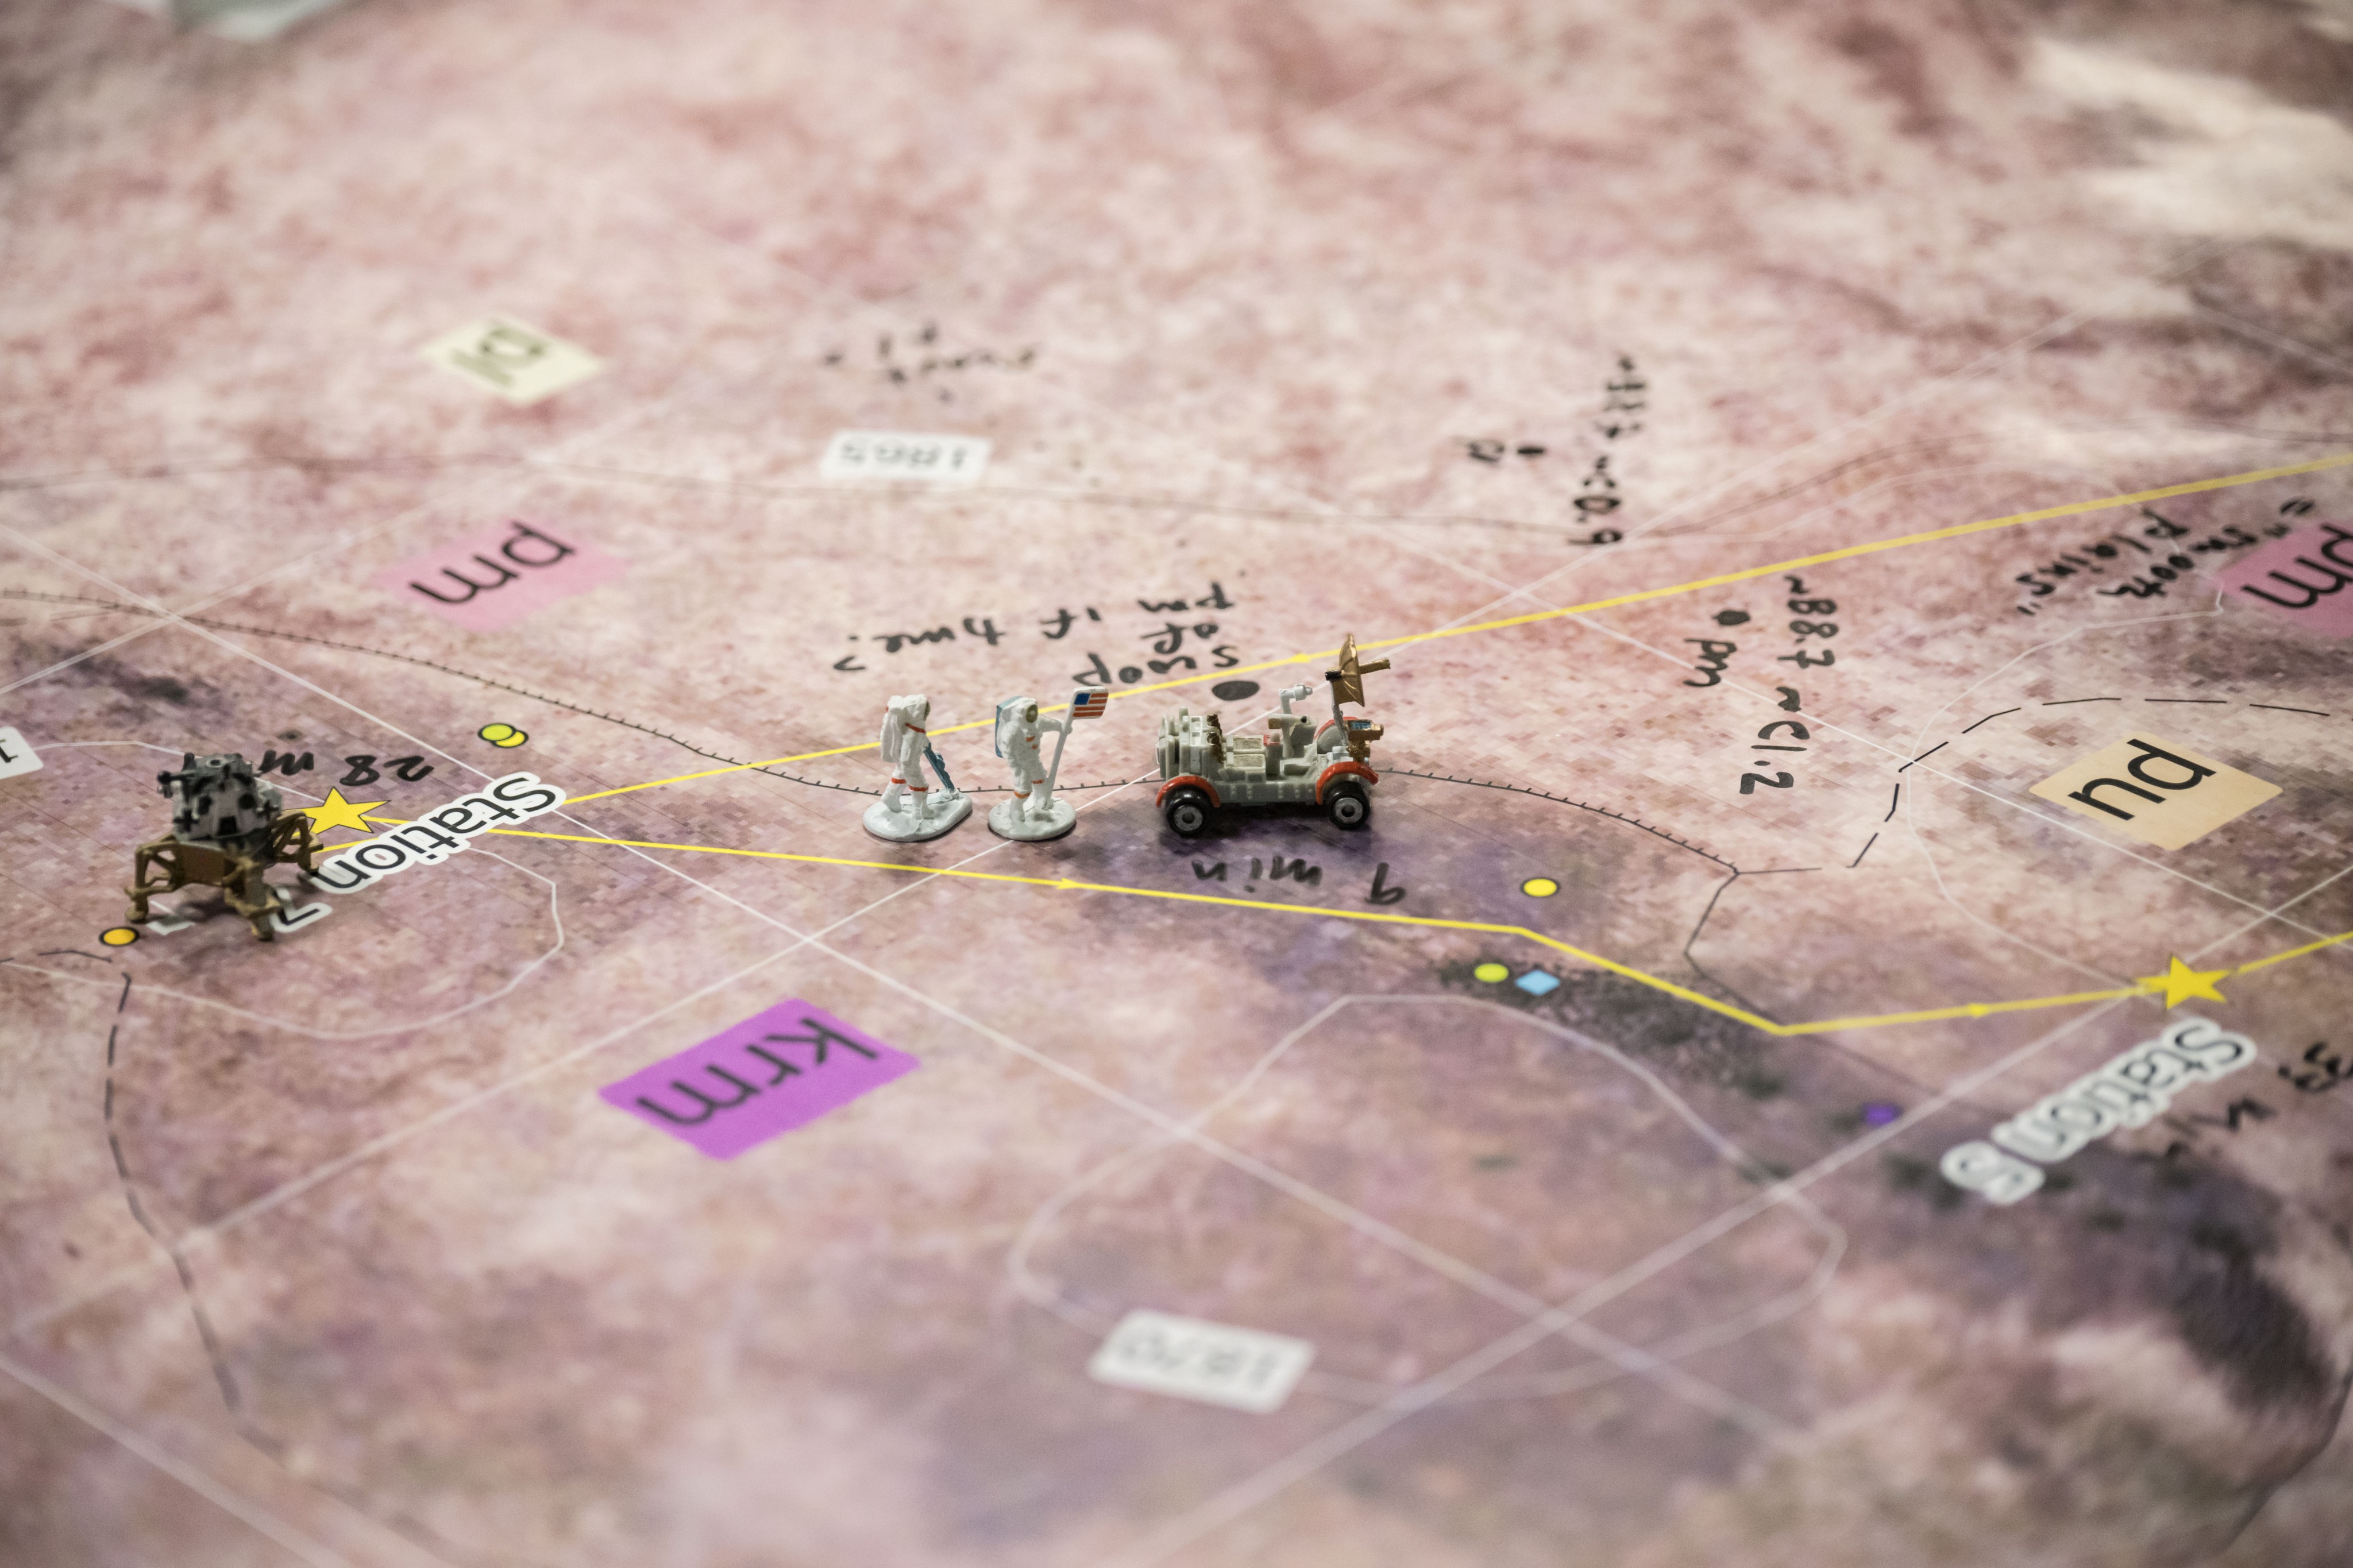 The image shows a closeup of a map that’s pinkish in color with small, shaded areas. There are labels on the map, such as “krm” and “pu,” and dotted lines, small dots and squares and stars that mark locations on the map. A miniature lander model, smaller than the palm of the hand, is sitting at a location on the map labeled “Station 7.” Two miniature astronaut figures, one holding a U.S. flag, are standing a few inches to the right of the lander, and to the right of them sits a miniature rover.